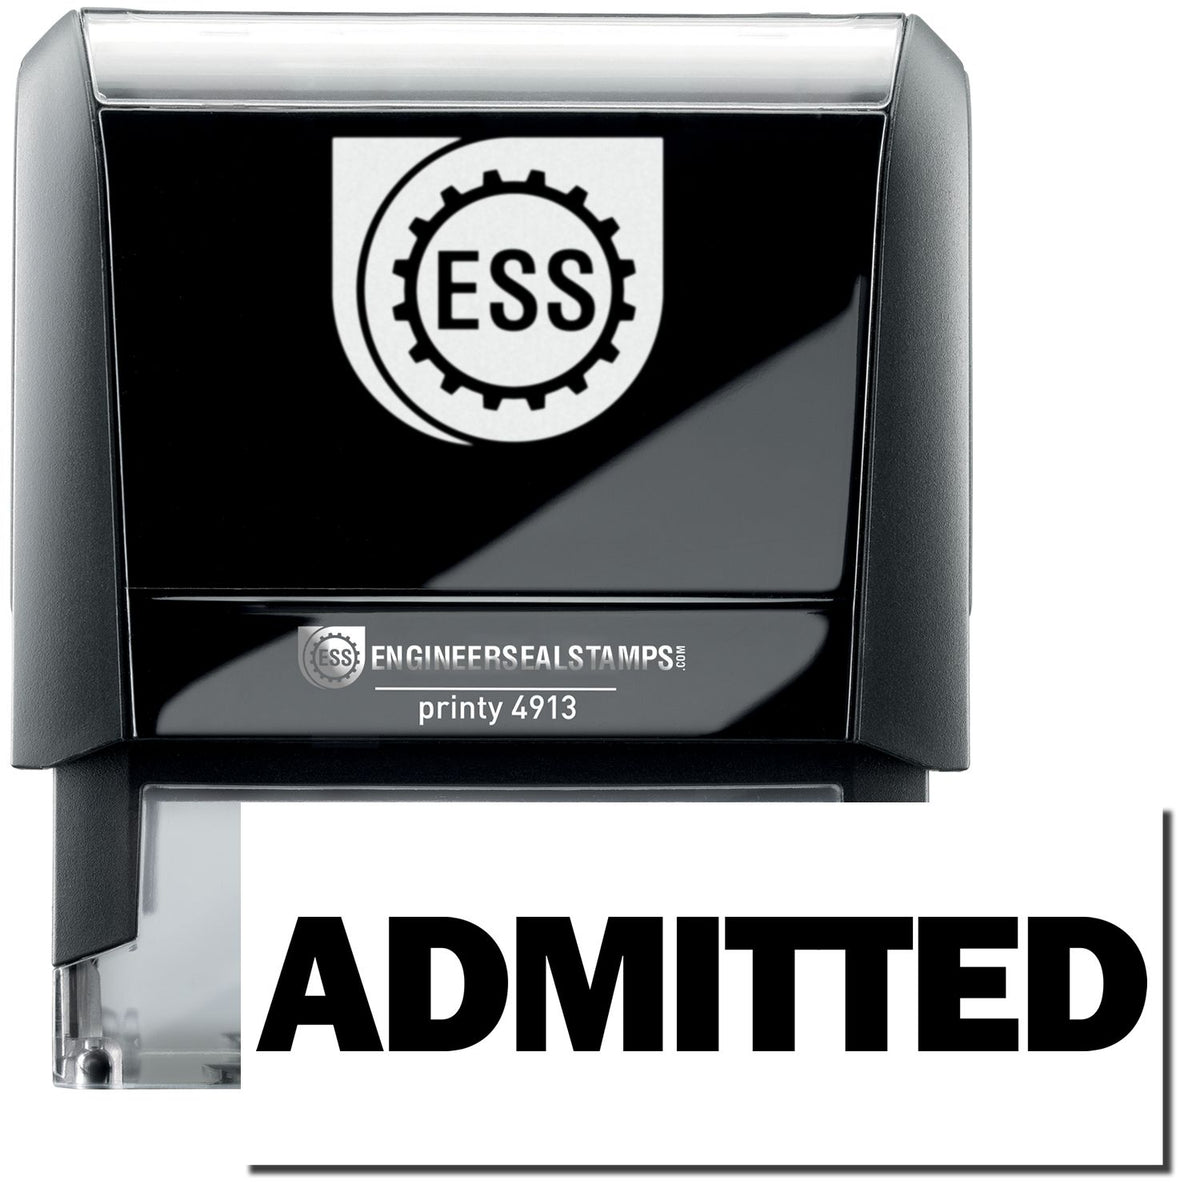 A self-inking stamp with a stamped image showing how the text &quot;ADMITTED&quot; in a large bold font is displayed by it after stamping.